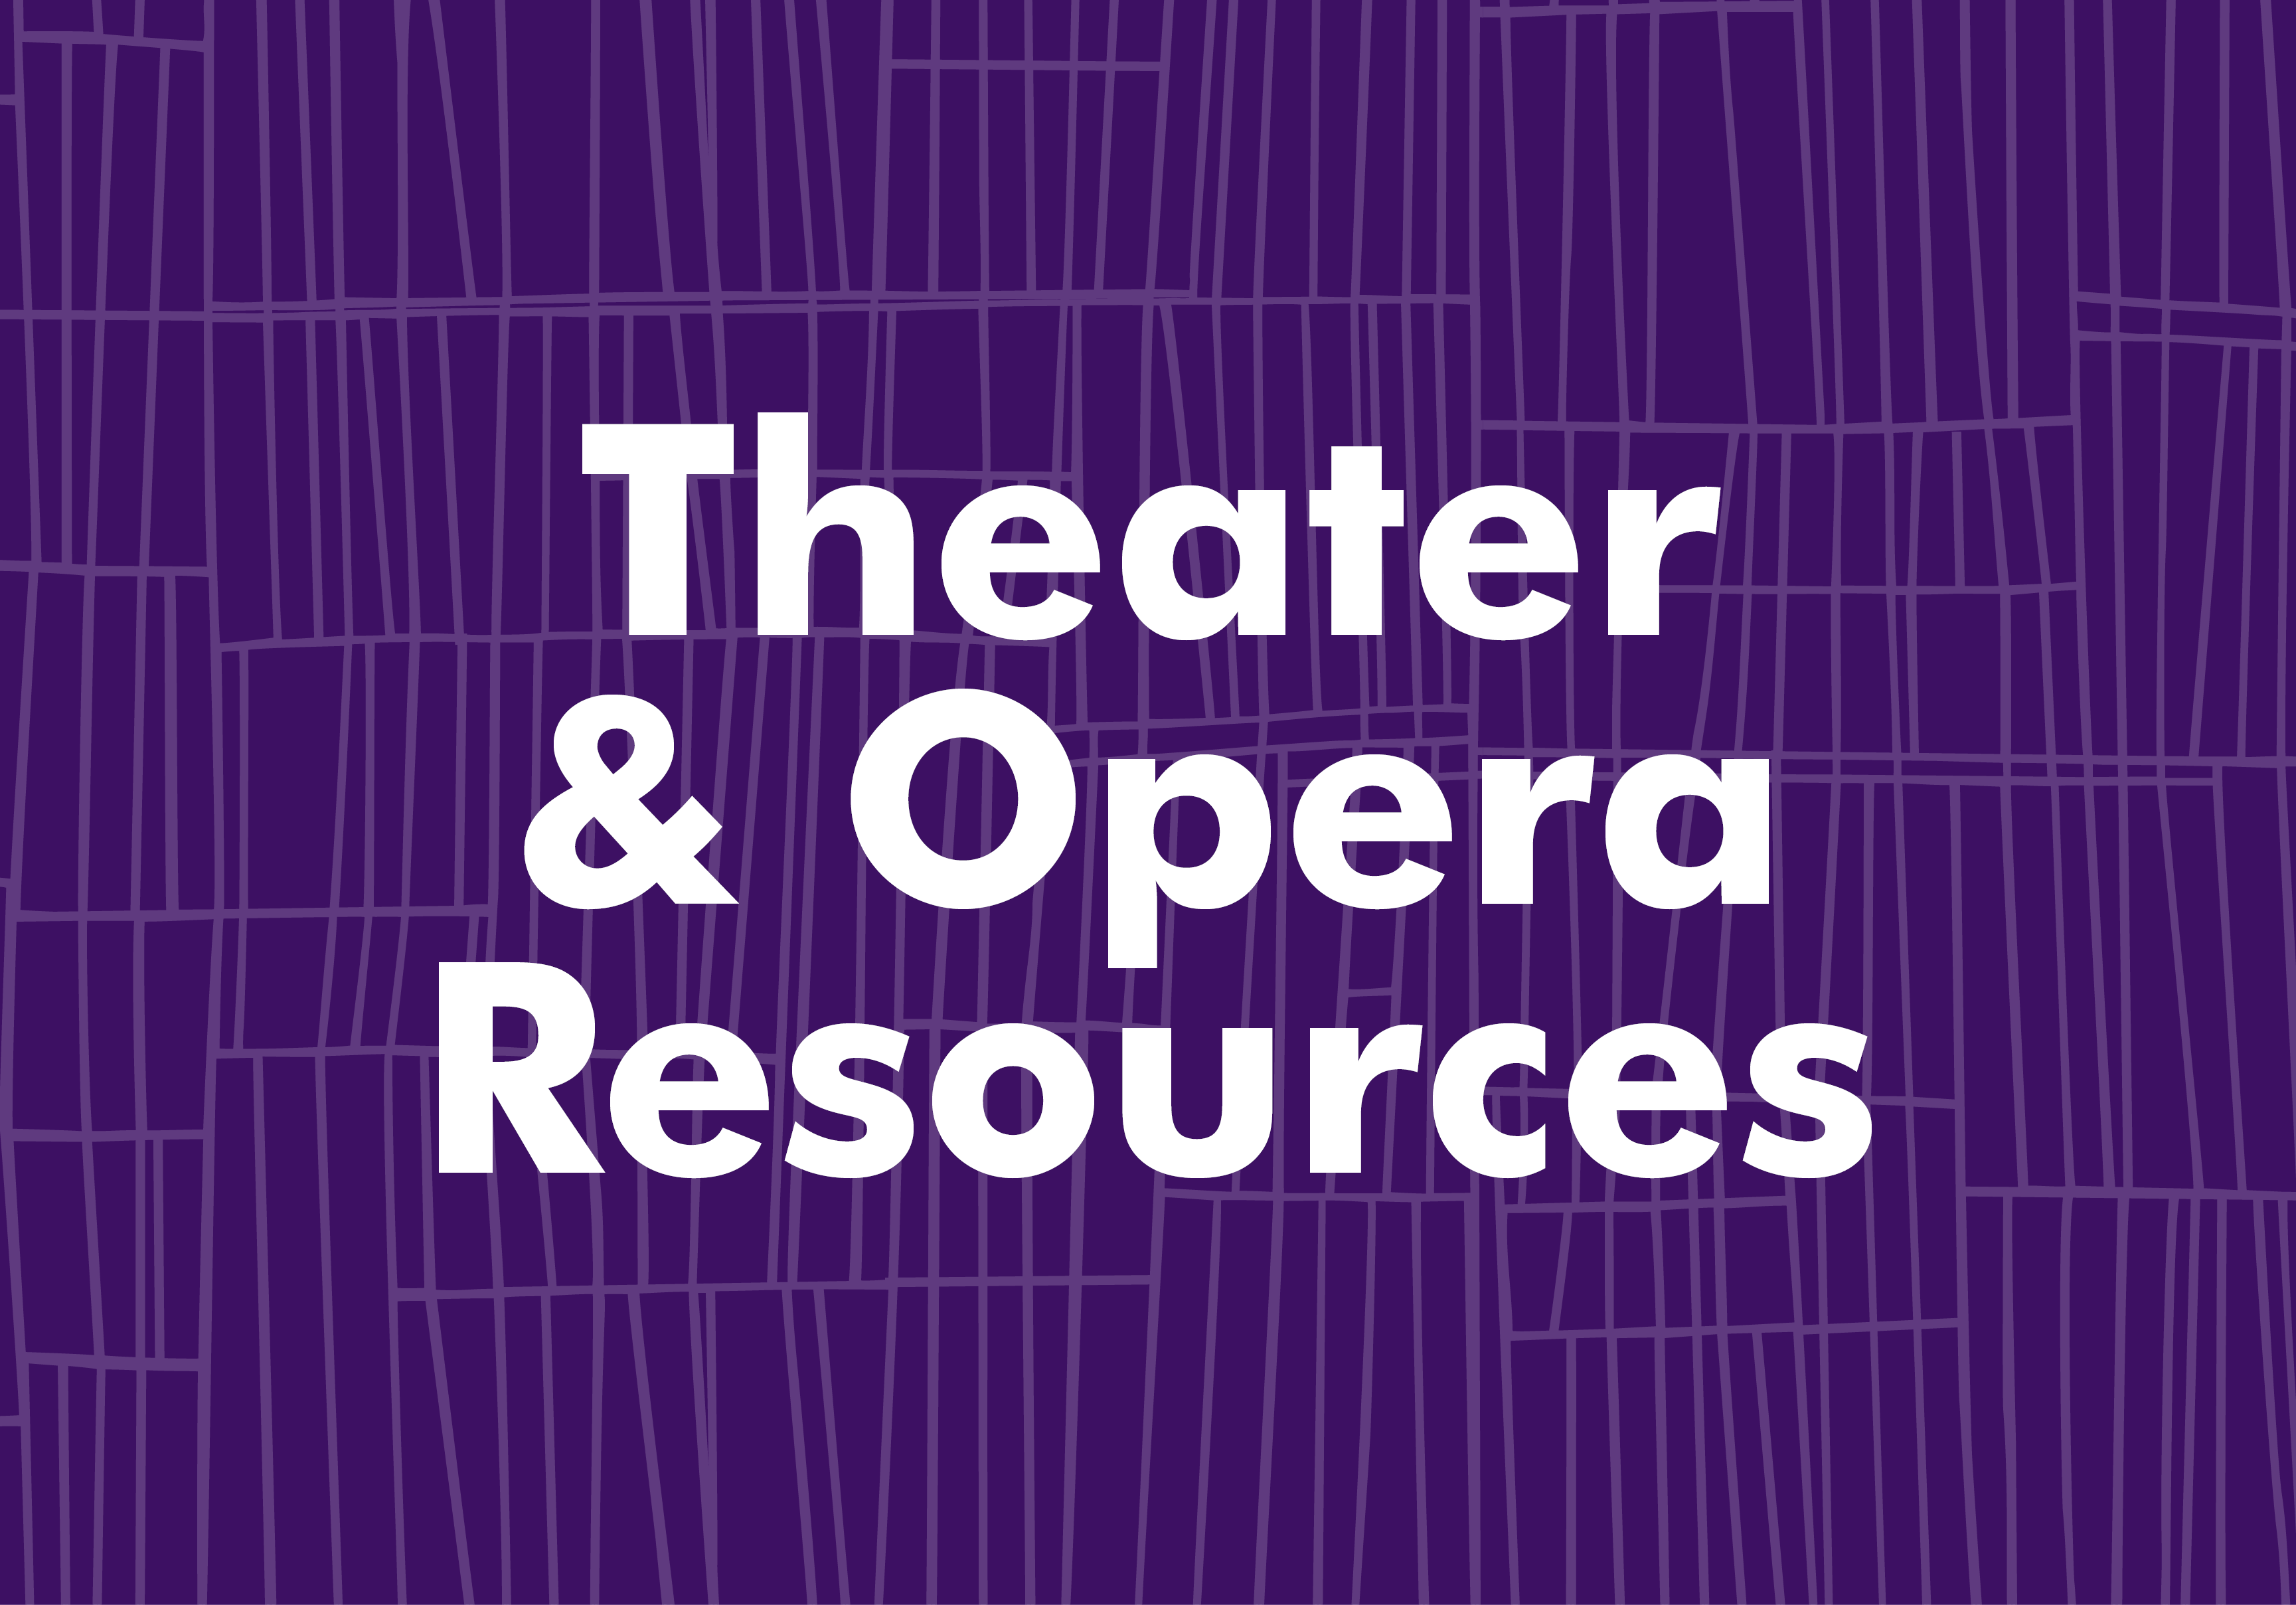 Theater resources graphic